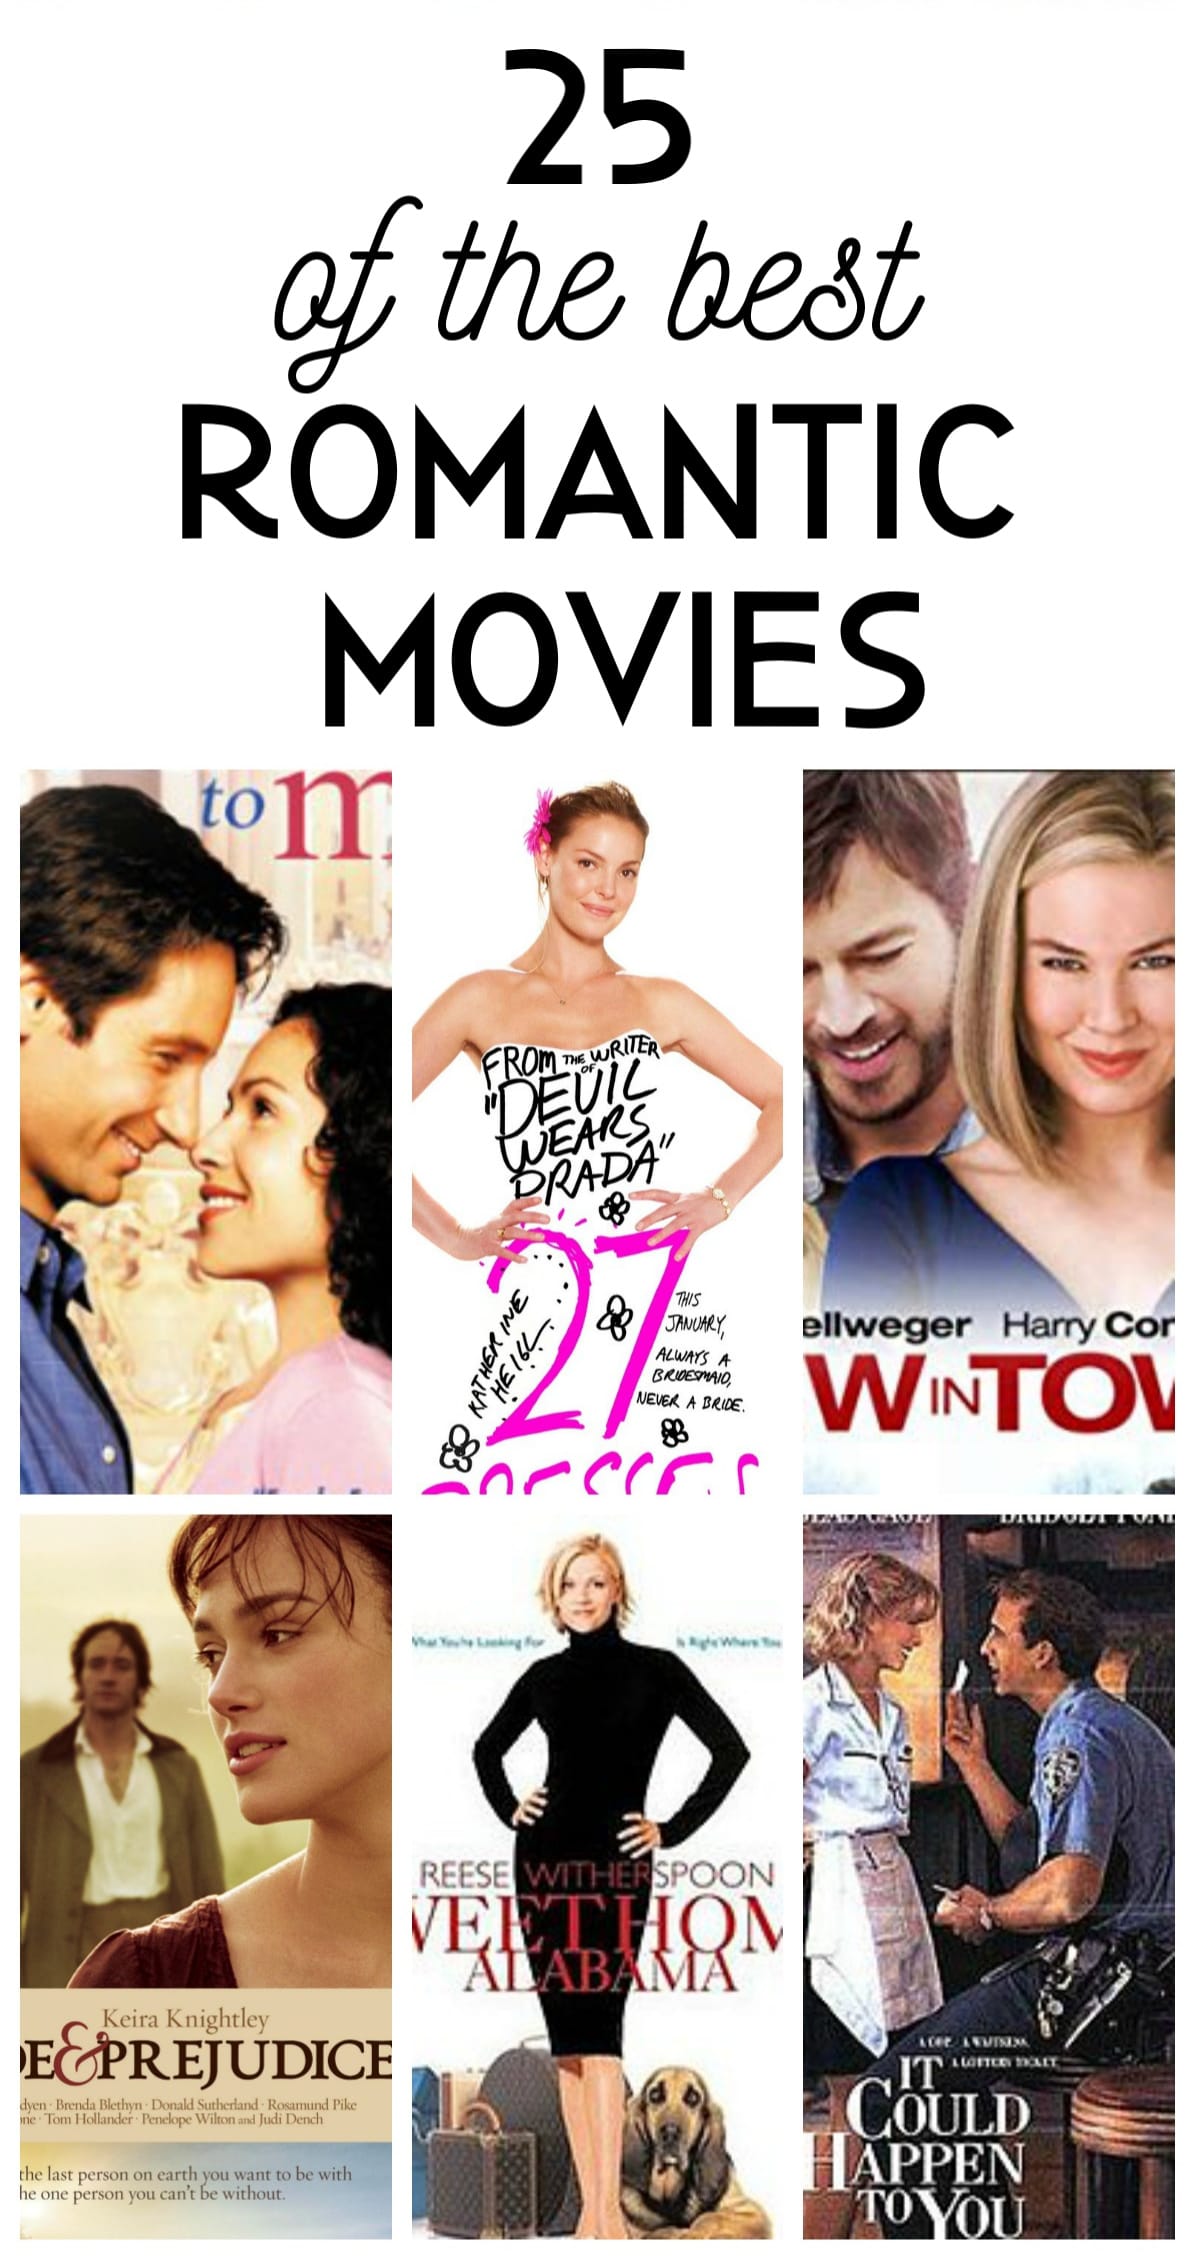 25 Most Romantic Movies (1) As For Me and My Homestead